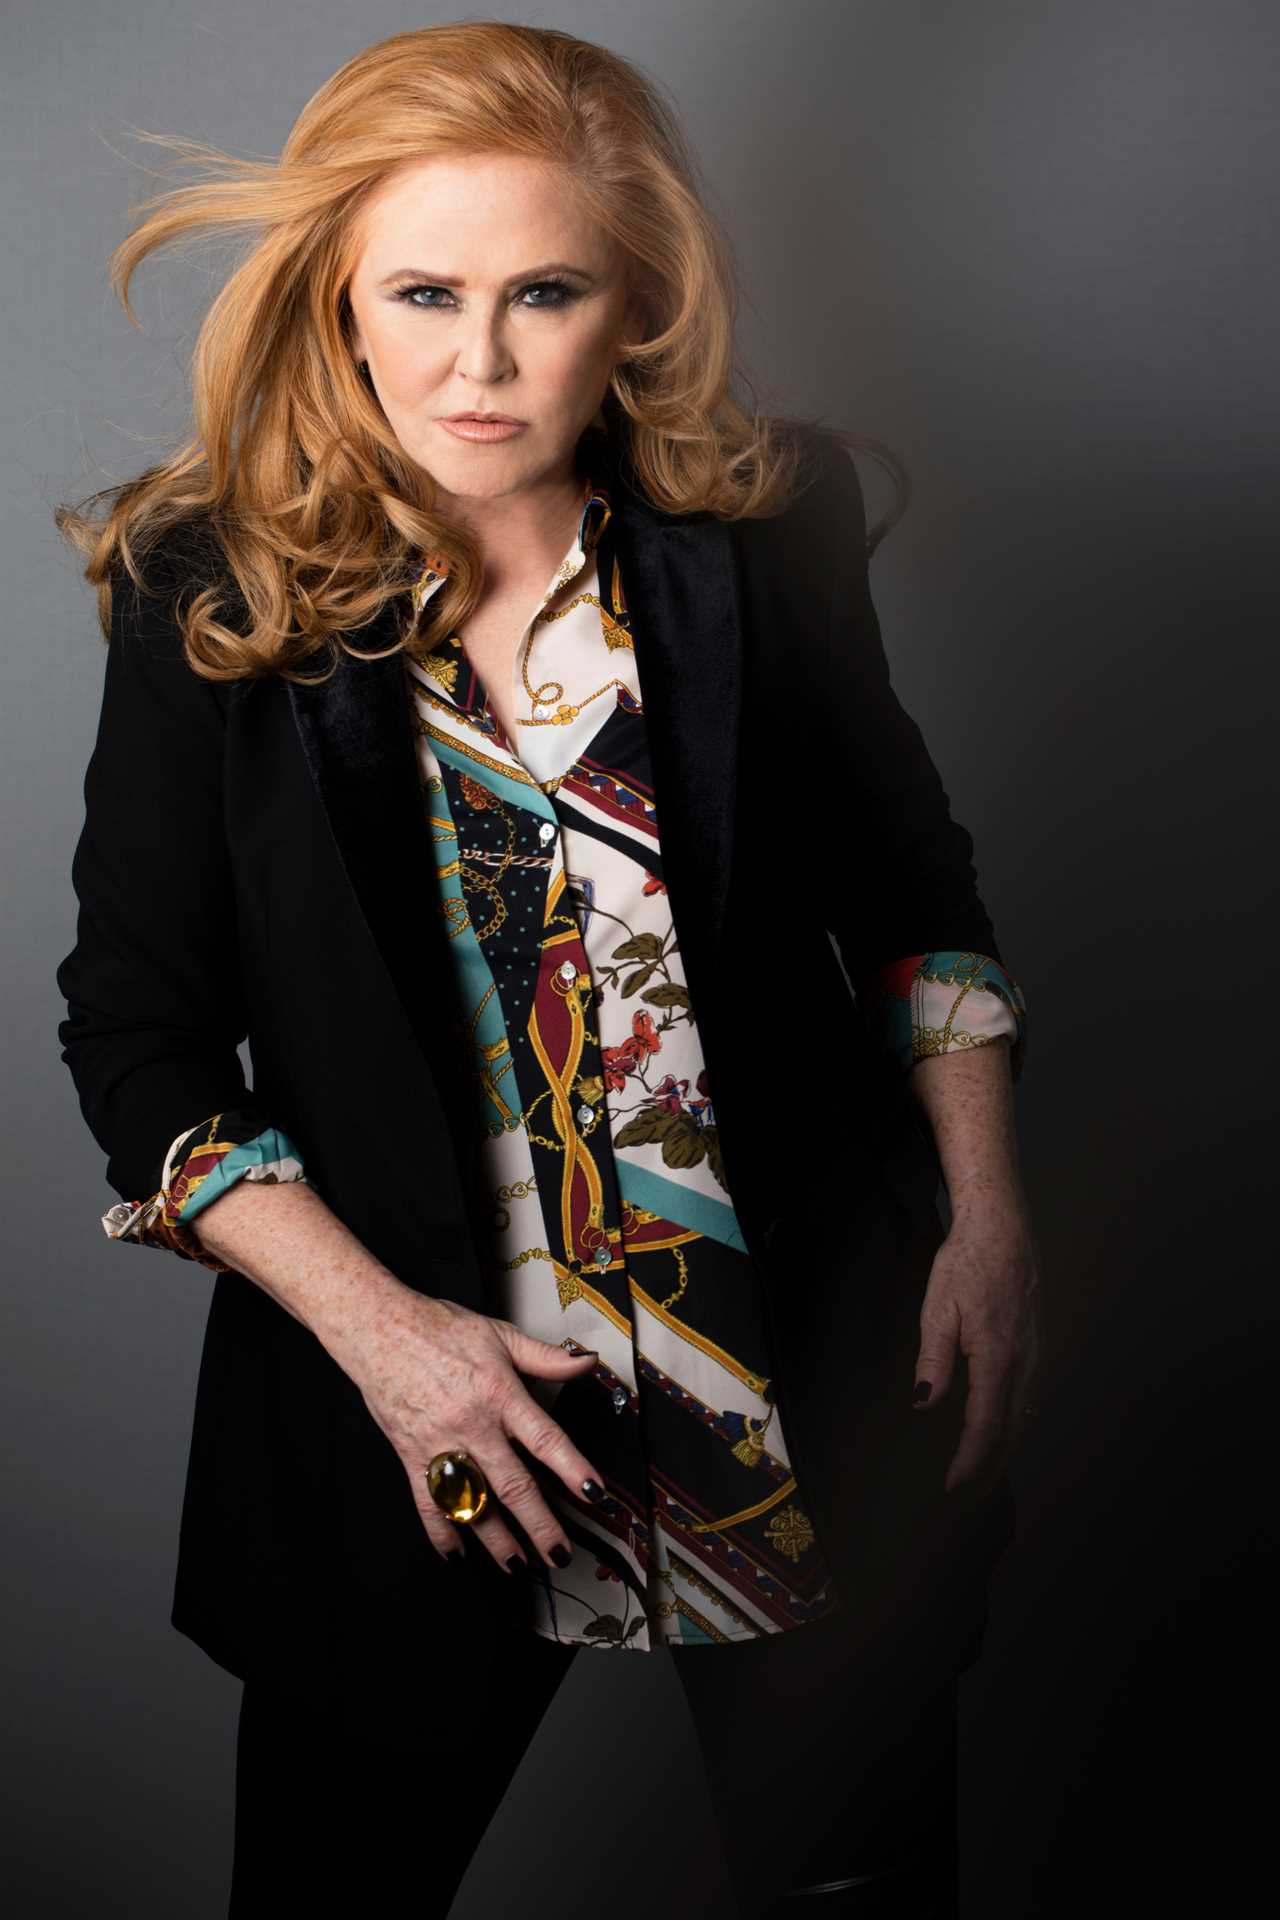 Sun Back To The 80s cruise: T’Pau’s Carol Decker says cruising is just like being on tour